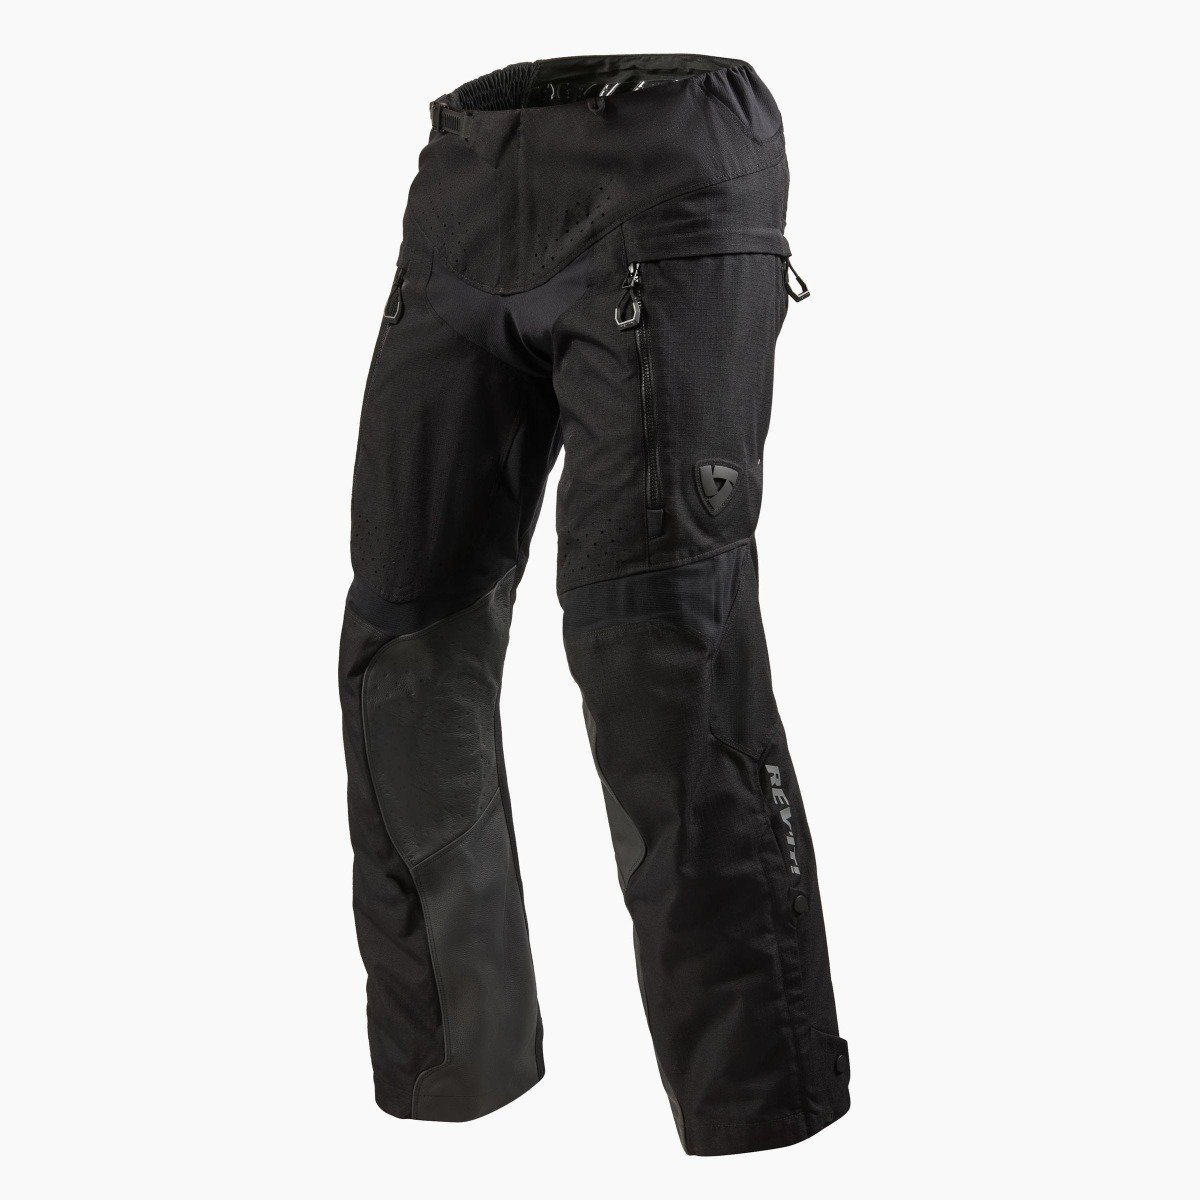 Image of REV'IT! Continent Long Black Motorcycle Pants Size L ID 8700001297141